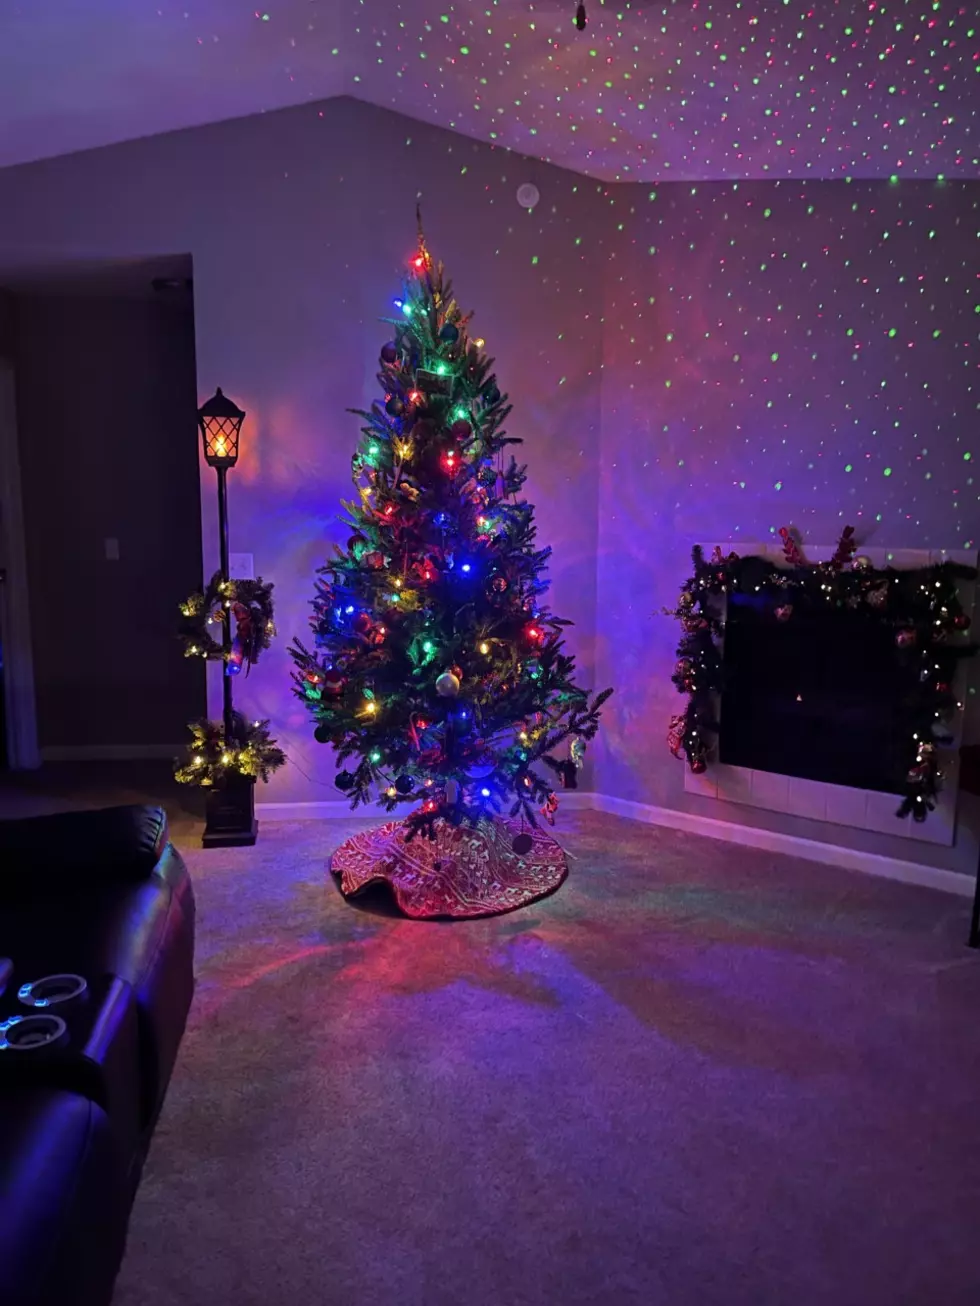 An Open Letter To Our “Perfect” Christmas Tree